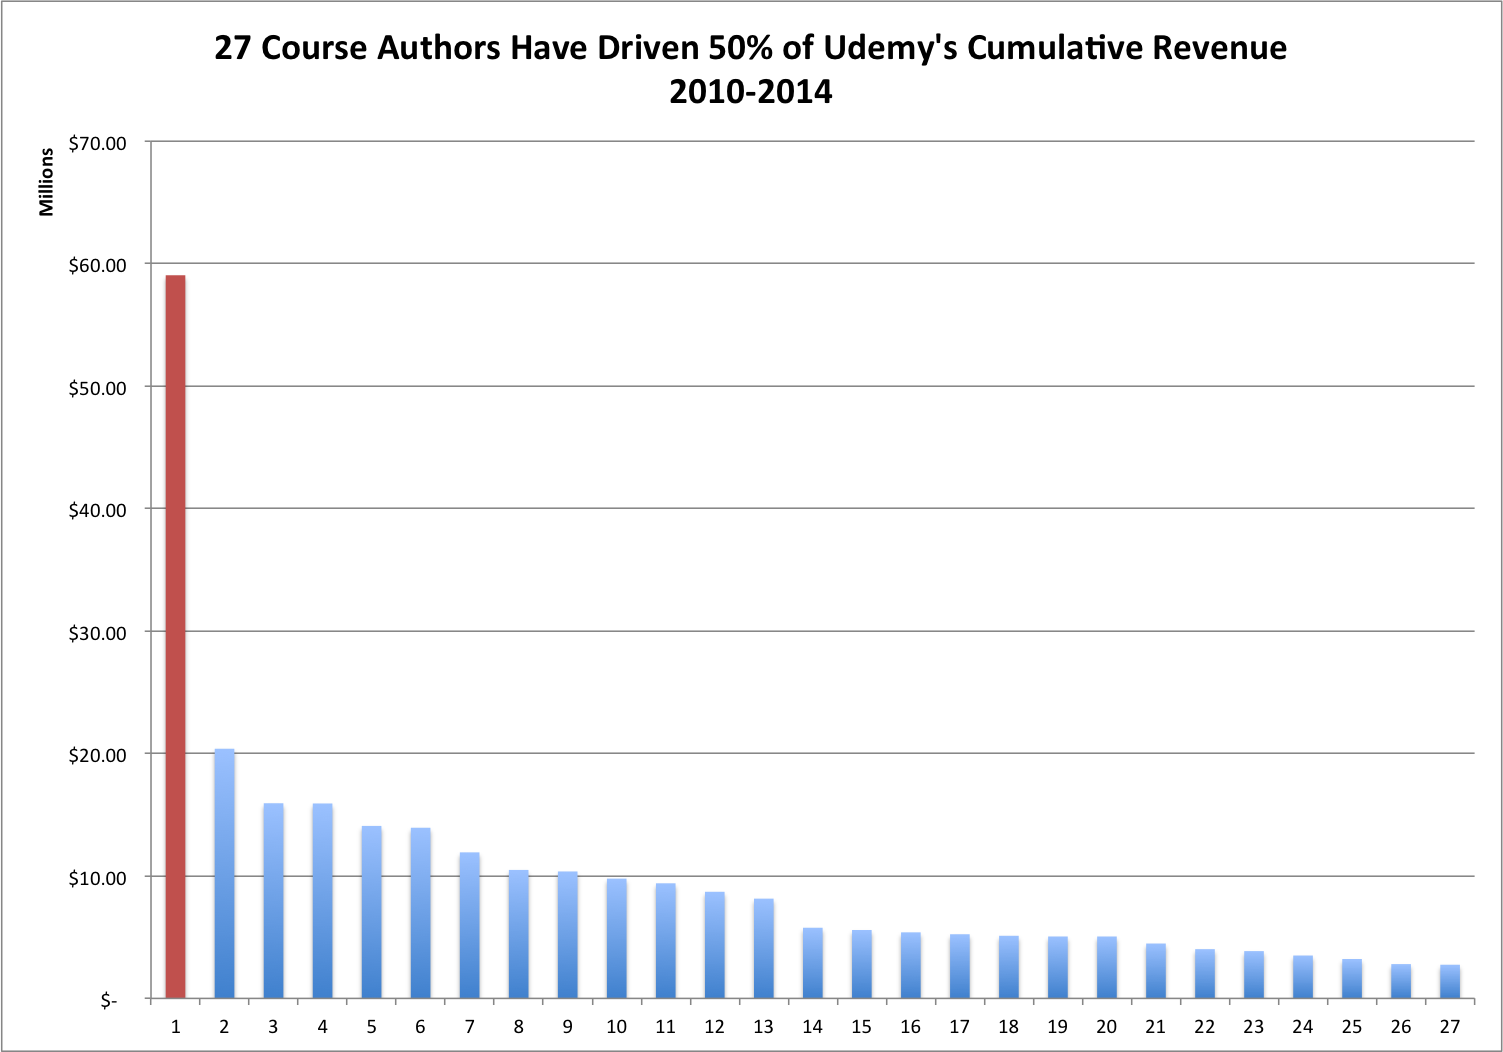 In November 2014, 27 course providers were responsible for 50% of Udemy's revenues.